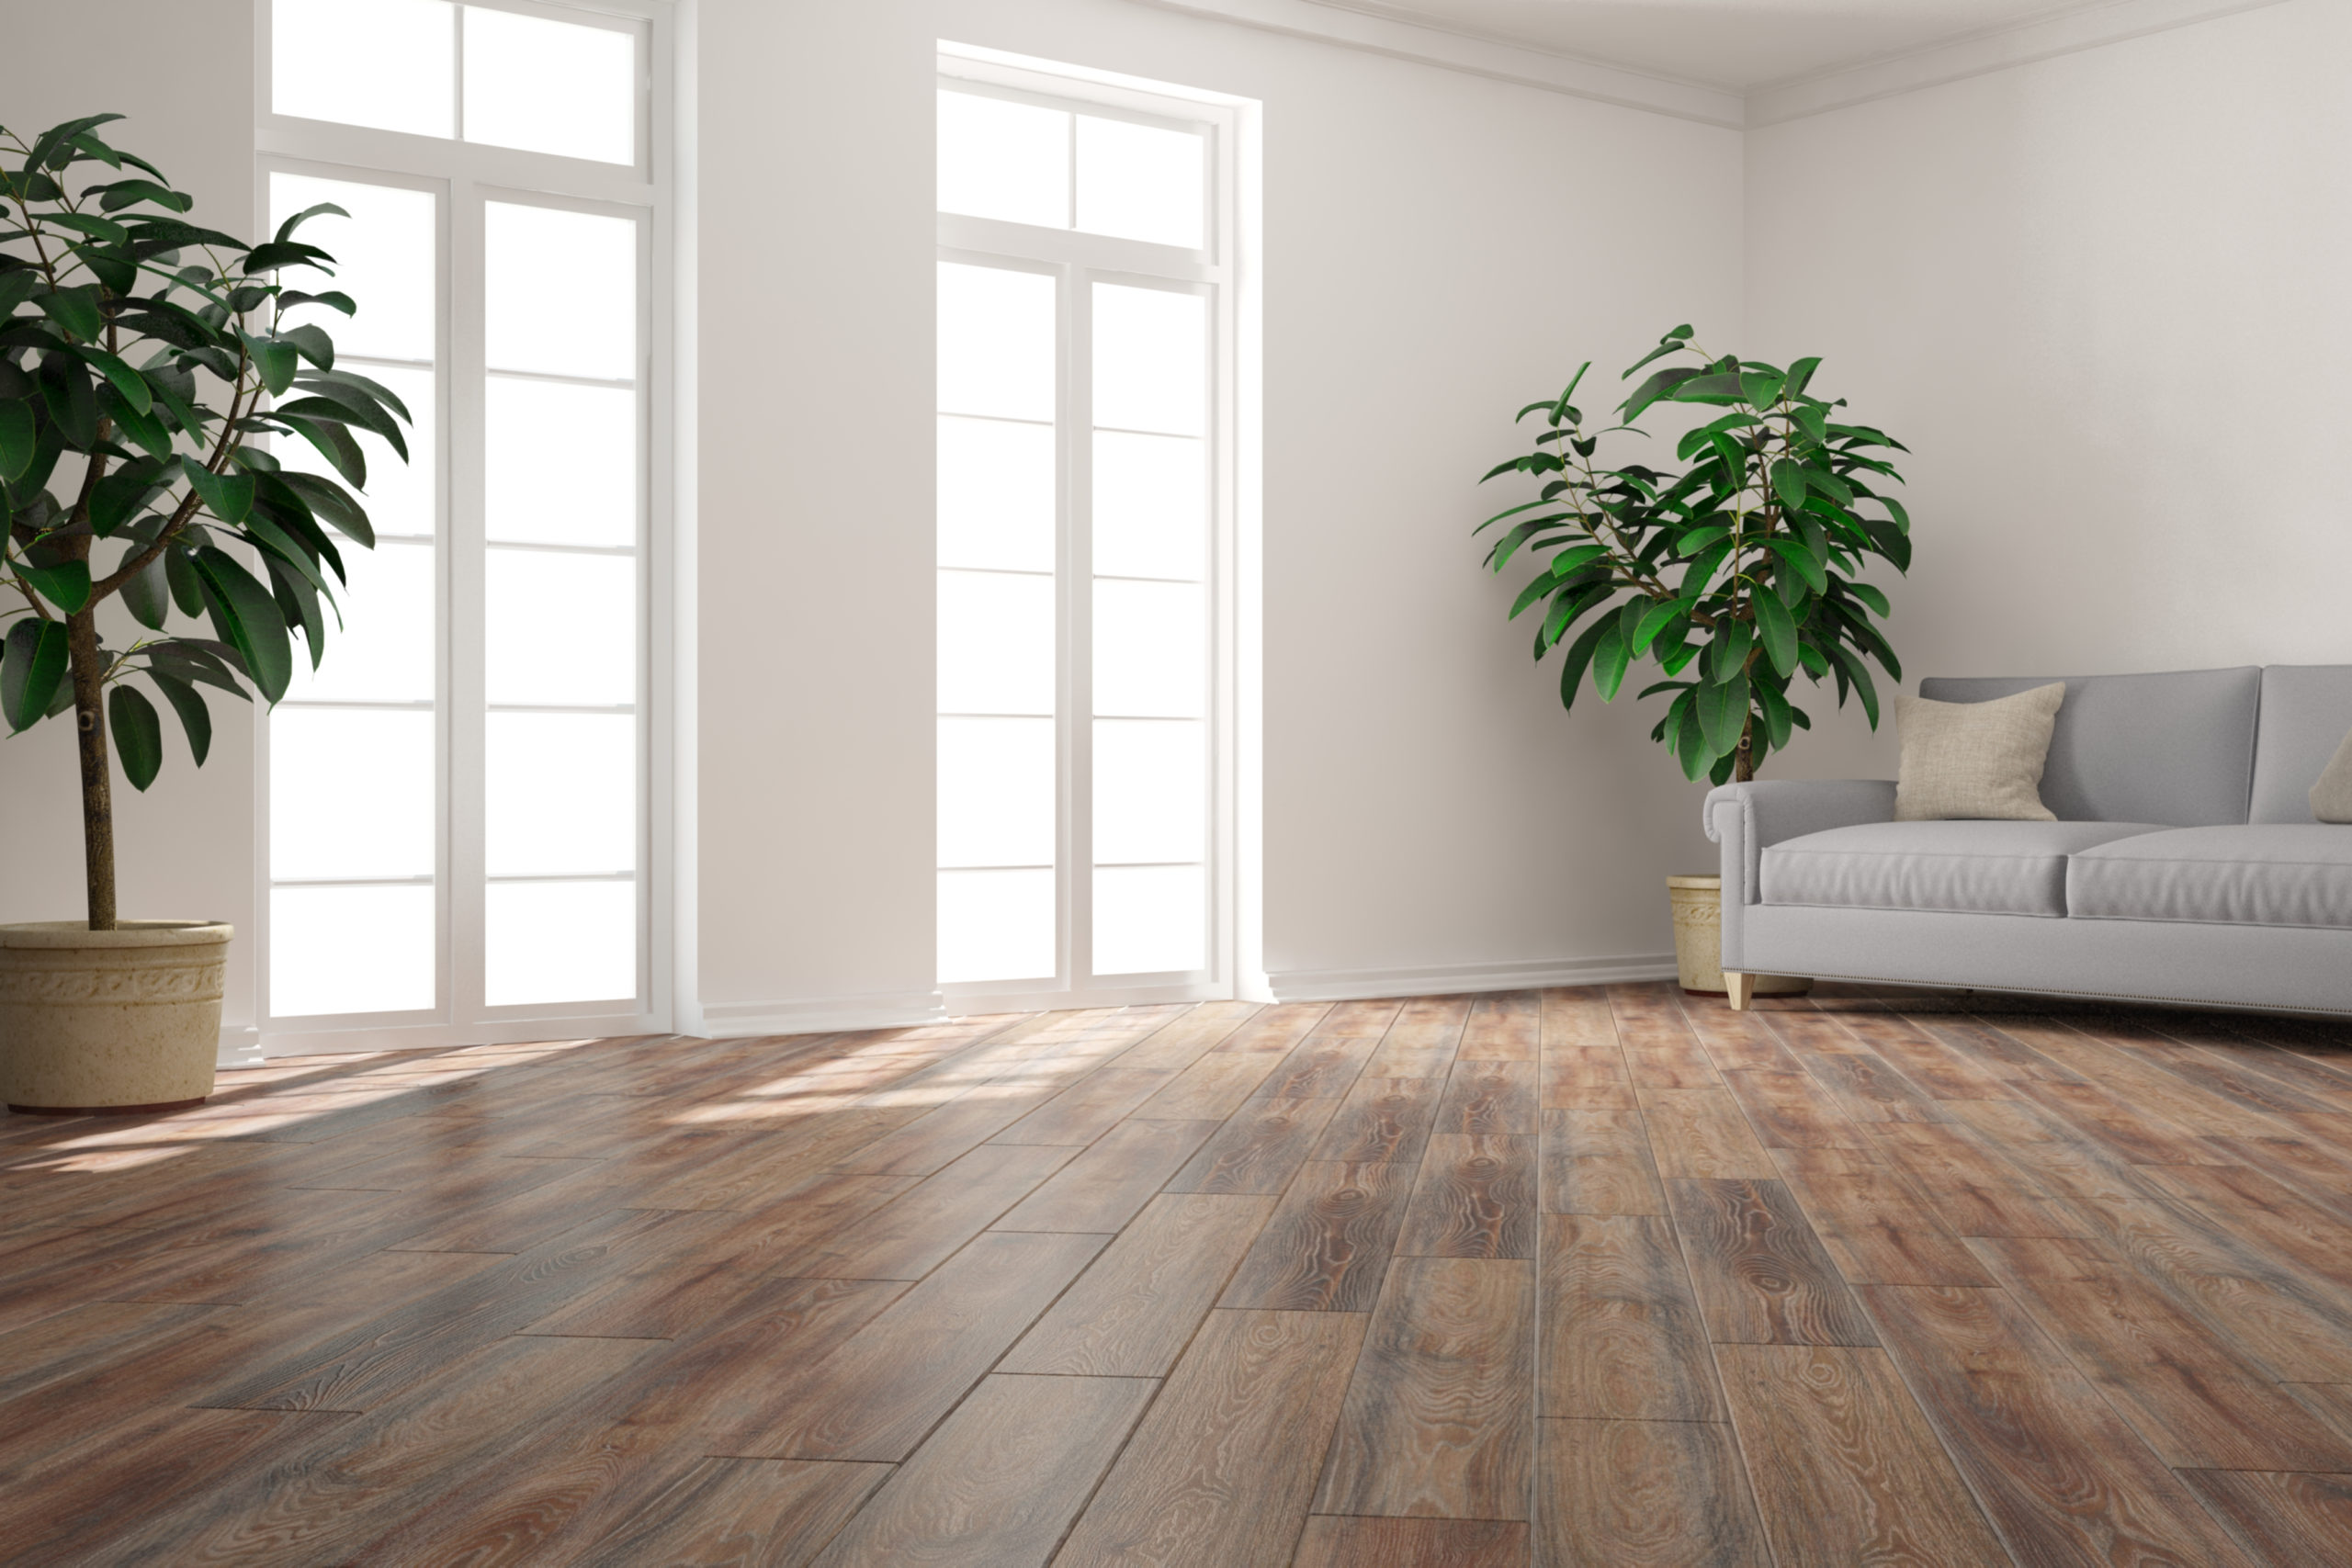 Armstrong Laminate Flooring Review, Armstrong Or Pergo Laminate Flooring